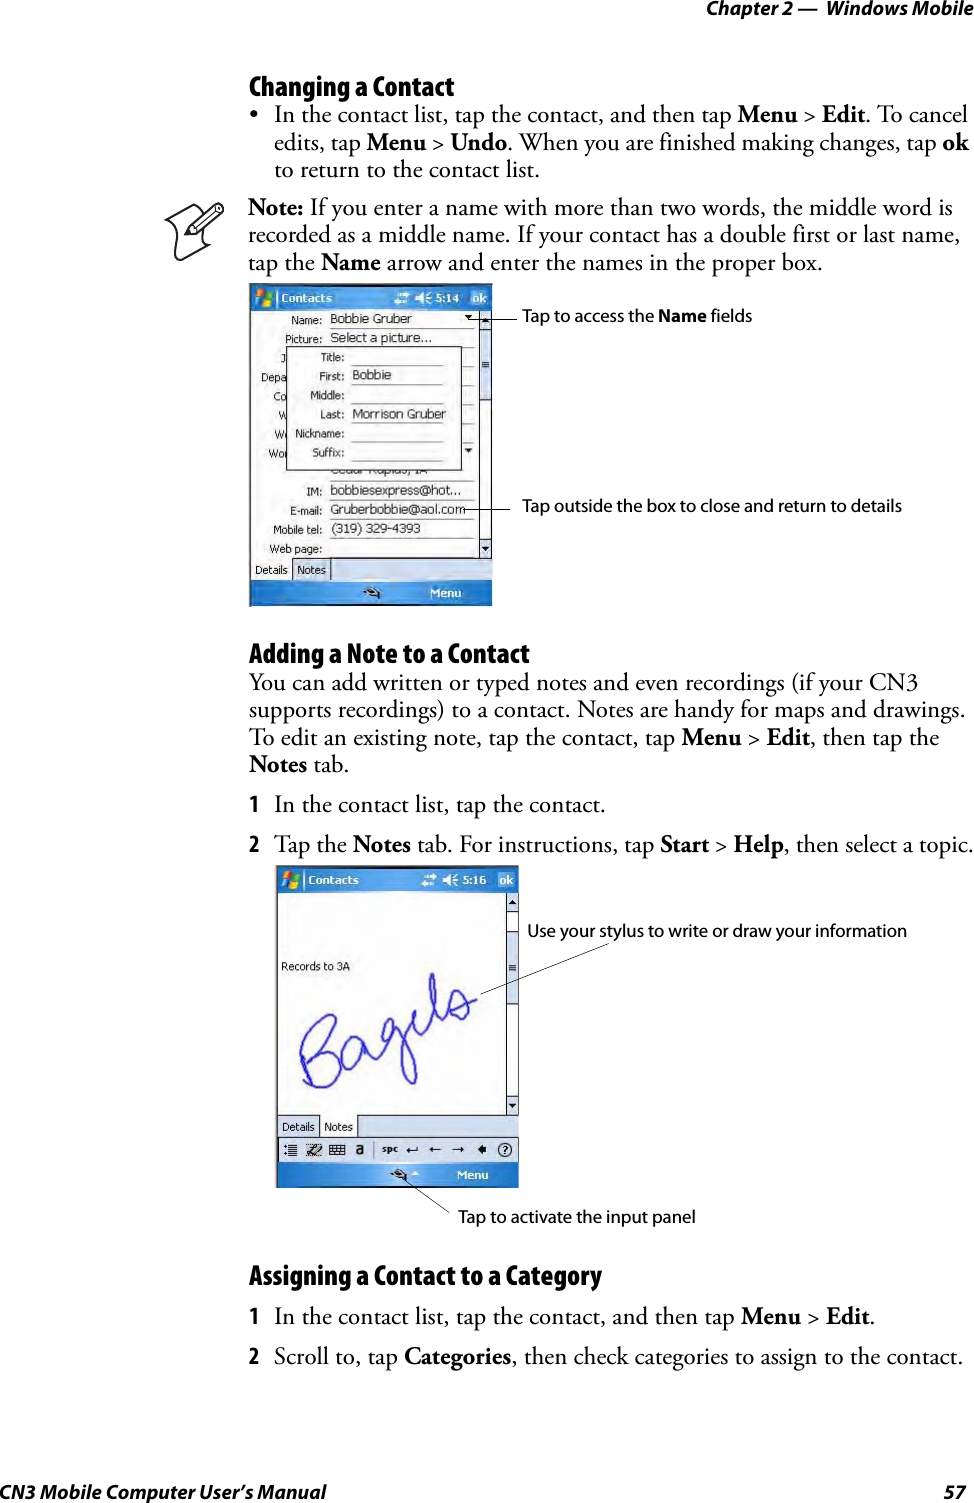 Chapter 2 —  Windows MobileCN3 Mobile Computer User’s Manual 57Changing a Contact• In the contact list, tap the contact, and then tap Menu &gt; Edit. To cancel edits, tap Menu &gt; Undo. When you are finished making changes, tap ok to return to the contact list.Adding a Note to a ContactYou can add written or typed notes and even recordings (if your CN3 supports recordings) to a contact. Notes are handy for maps and drawings. To edit an existing note, tap the contact, tap Menu &gt; Edit, then tap the Notes tab.1In the contact list, tap the contact.2Tap t h e  Notes tab. For instructions, tap Start &gt; Help, then select a topic.Assigning a Contact to a Category1In the contact list, tap the contact, and then tap Menu &gt; Edit.2Scroll to, tap Categories, then check categories to assign to the contact.Note: If you enter a name with more than two words, the middle word is recorded as a middle name. If your contact has a double first or last name, tap the Name arrow and enter the names in the proper box.Tap to access the Name fieldsTap outside the box to close and return to detailsUse your stylus to write or draw your informationTap to activate the input panel